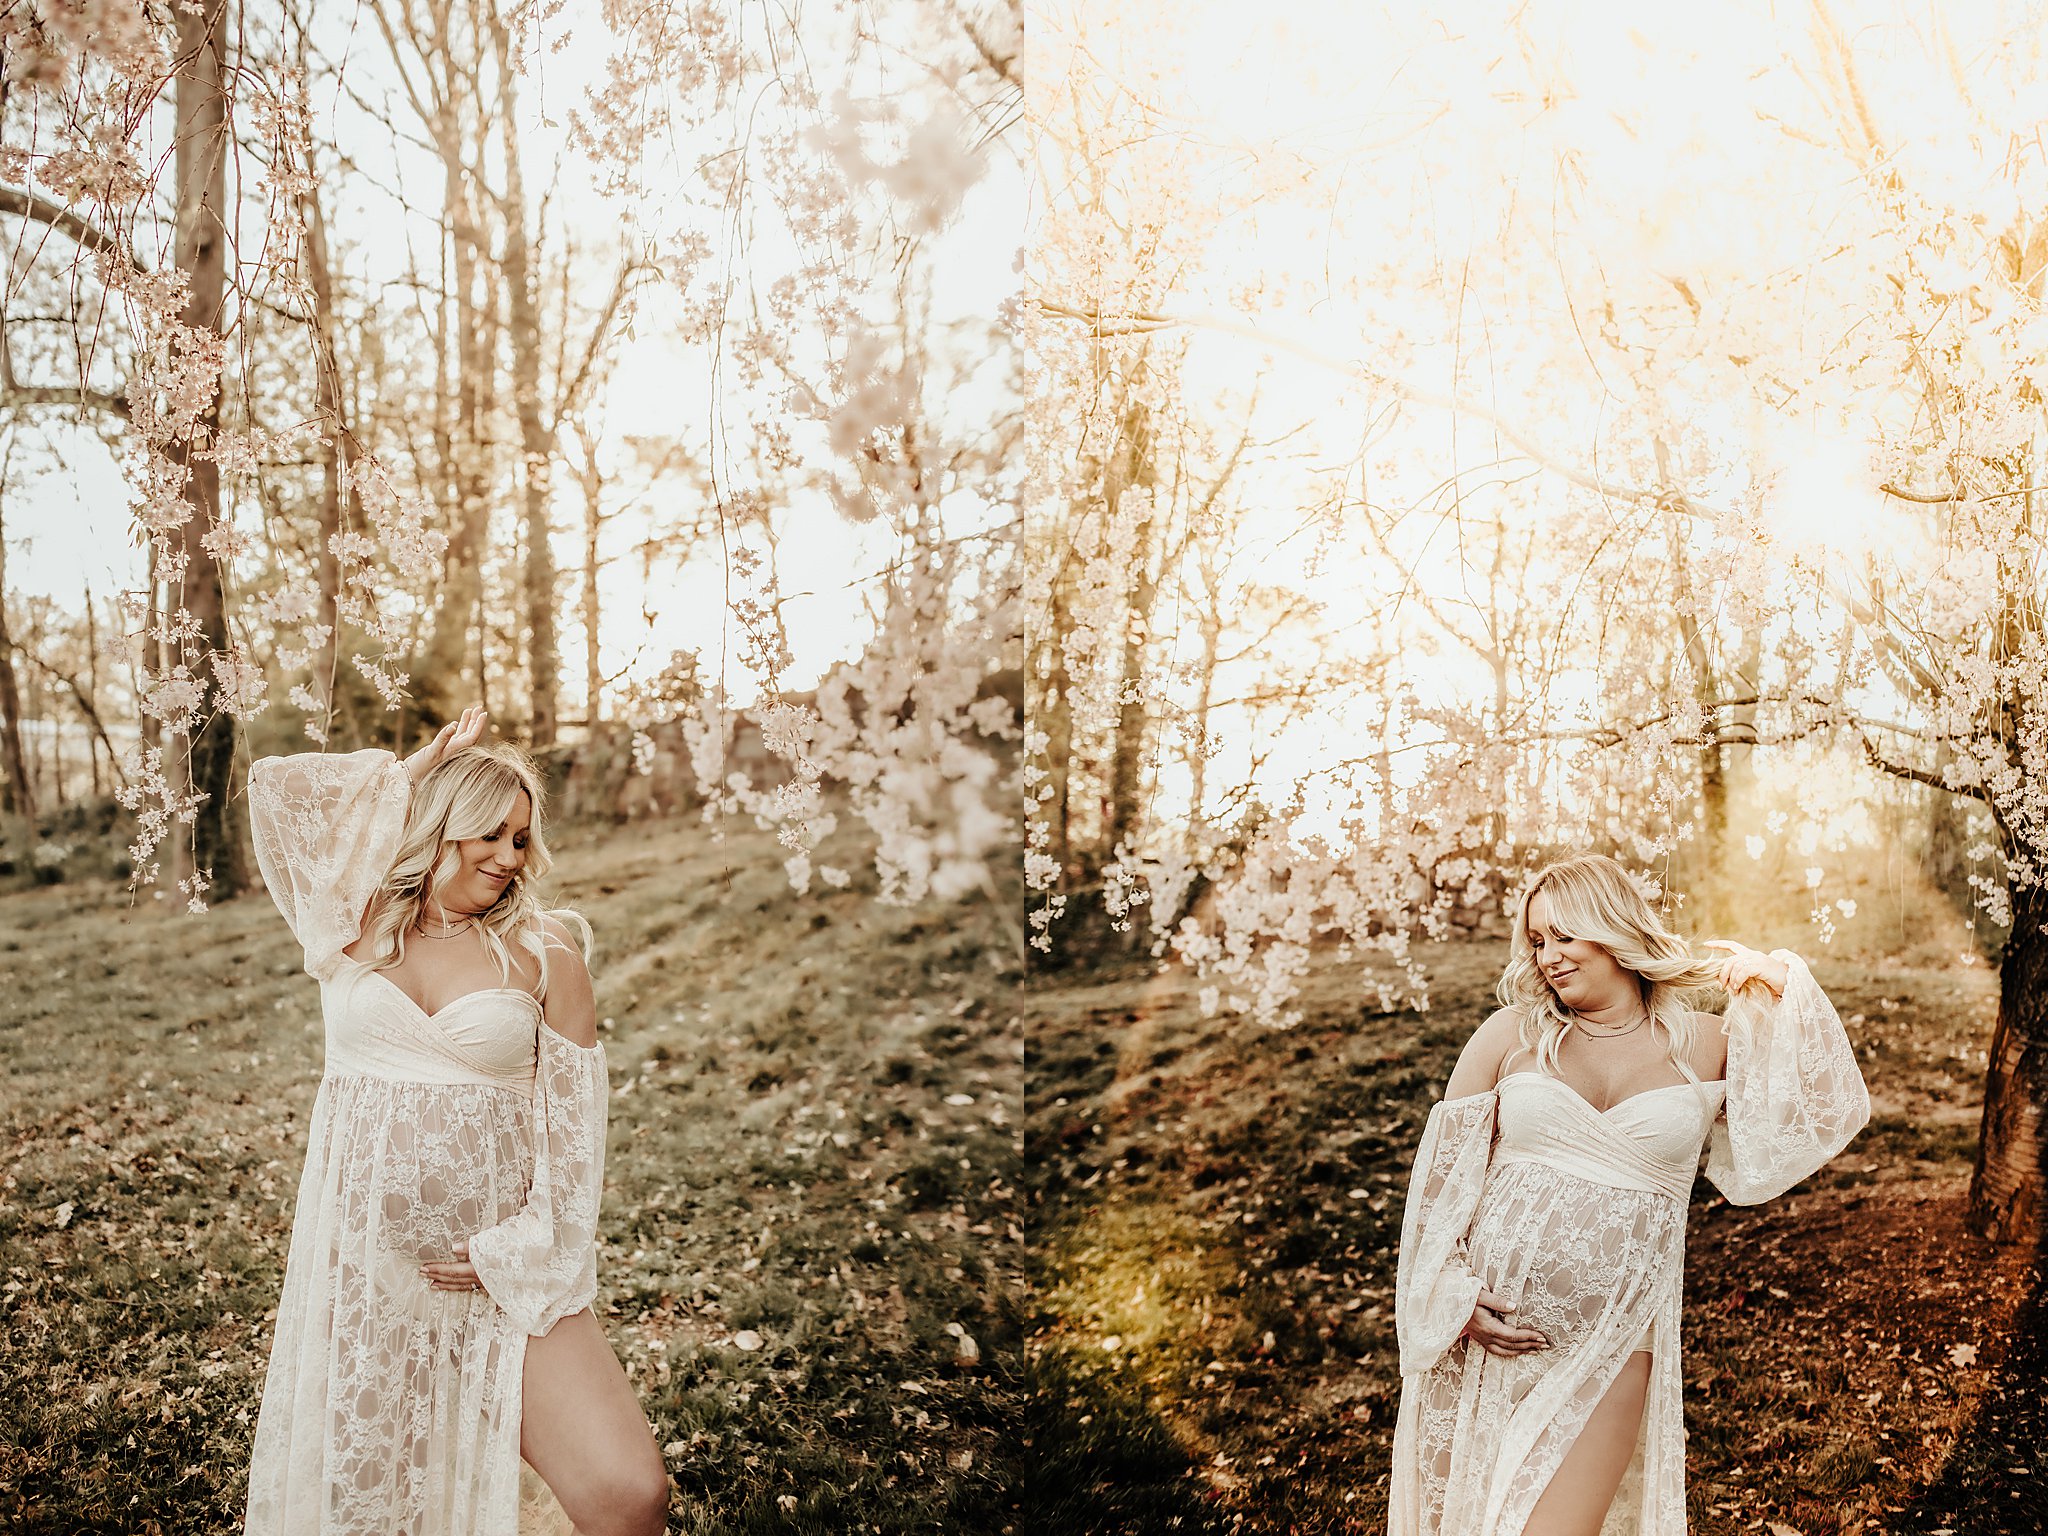 Maternity session during spring time at Josephine Fountain at Delaware State Park featuring cherry blossoms and golden hour